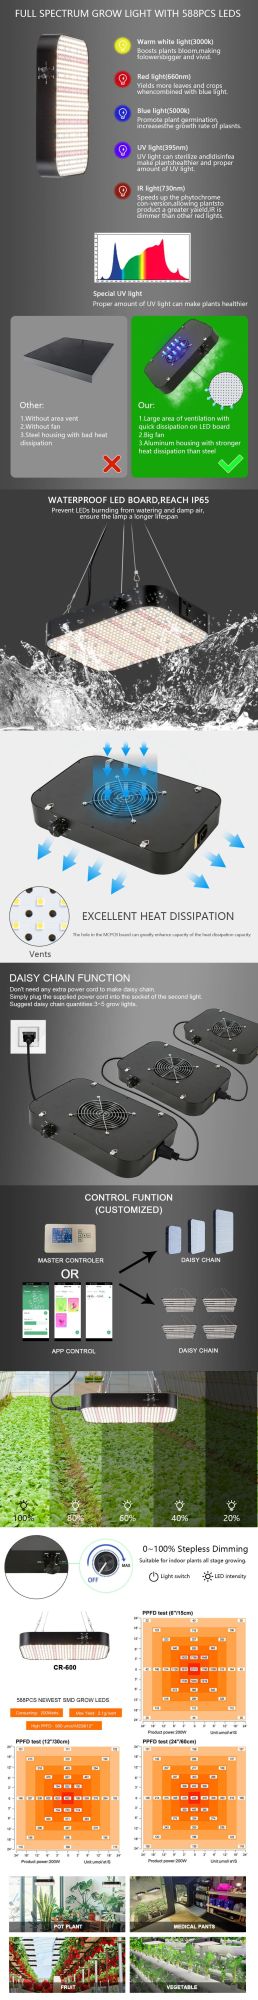 Hot Sale Us Store Samsung, Osram, Optional Diodes Knob Dimming 0-100% 80W Indoor Panel LED Grow Tent Grow Light Fixtures for Medical Plant (2-Year Warranty)